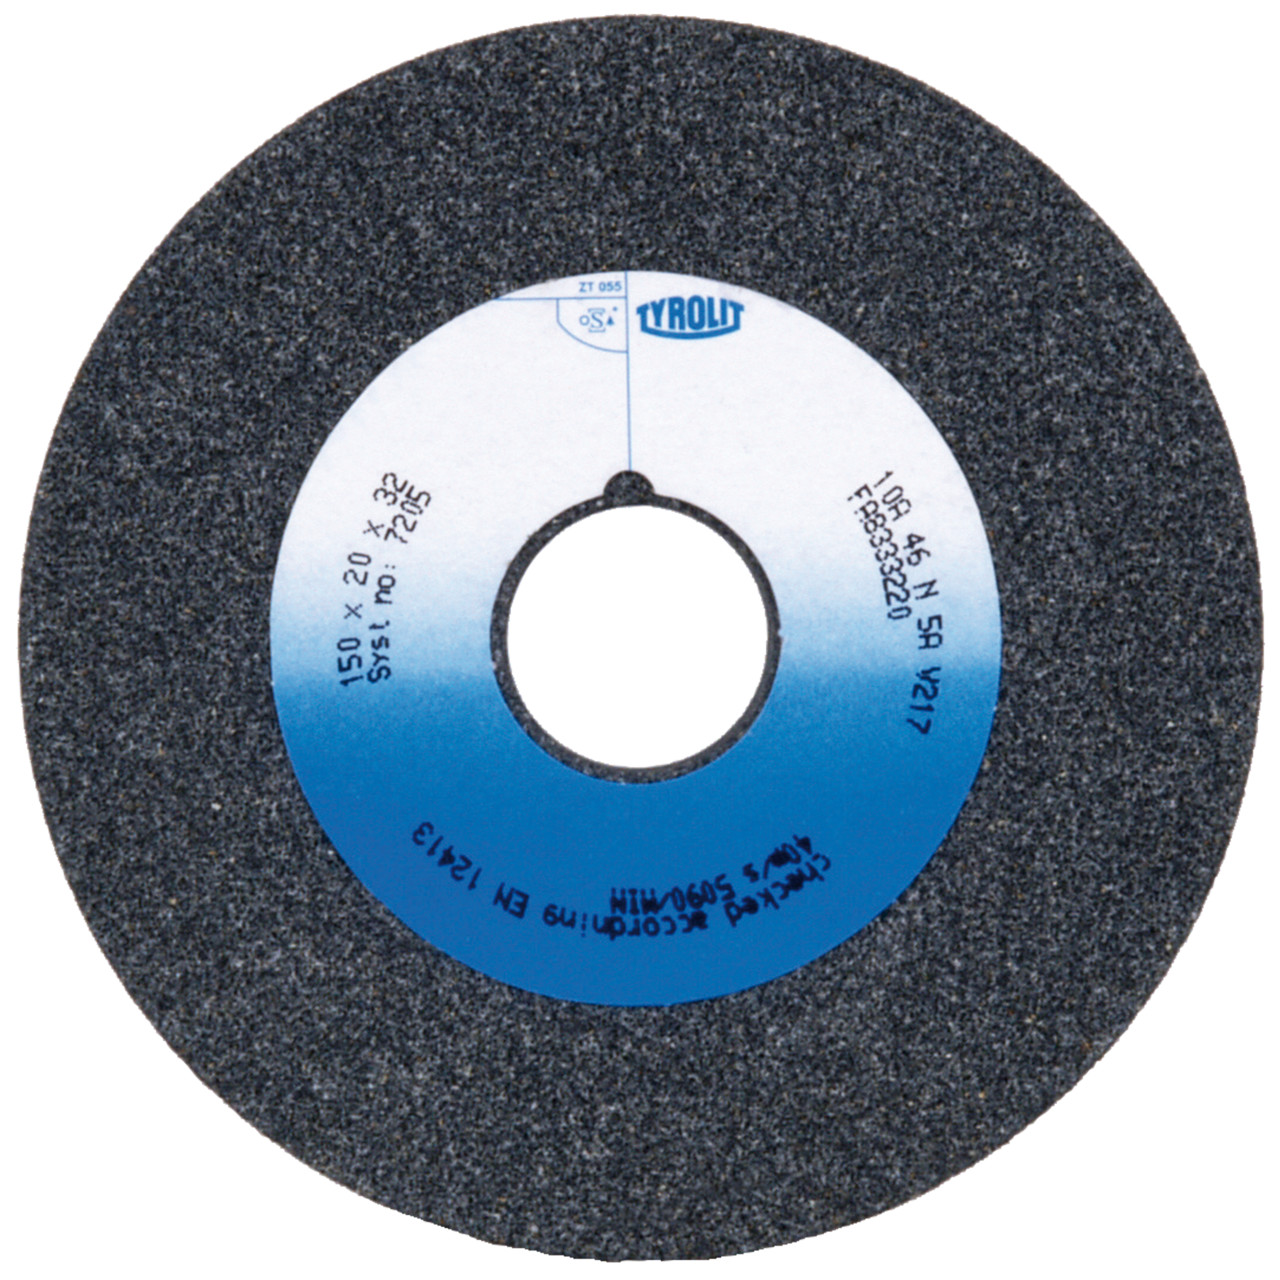 Tyrolit Conventional ceramic grinding discs DxDxH 150x20x32 For unalloyed and low-alloy steels, shape: 1, Art. 7205